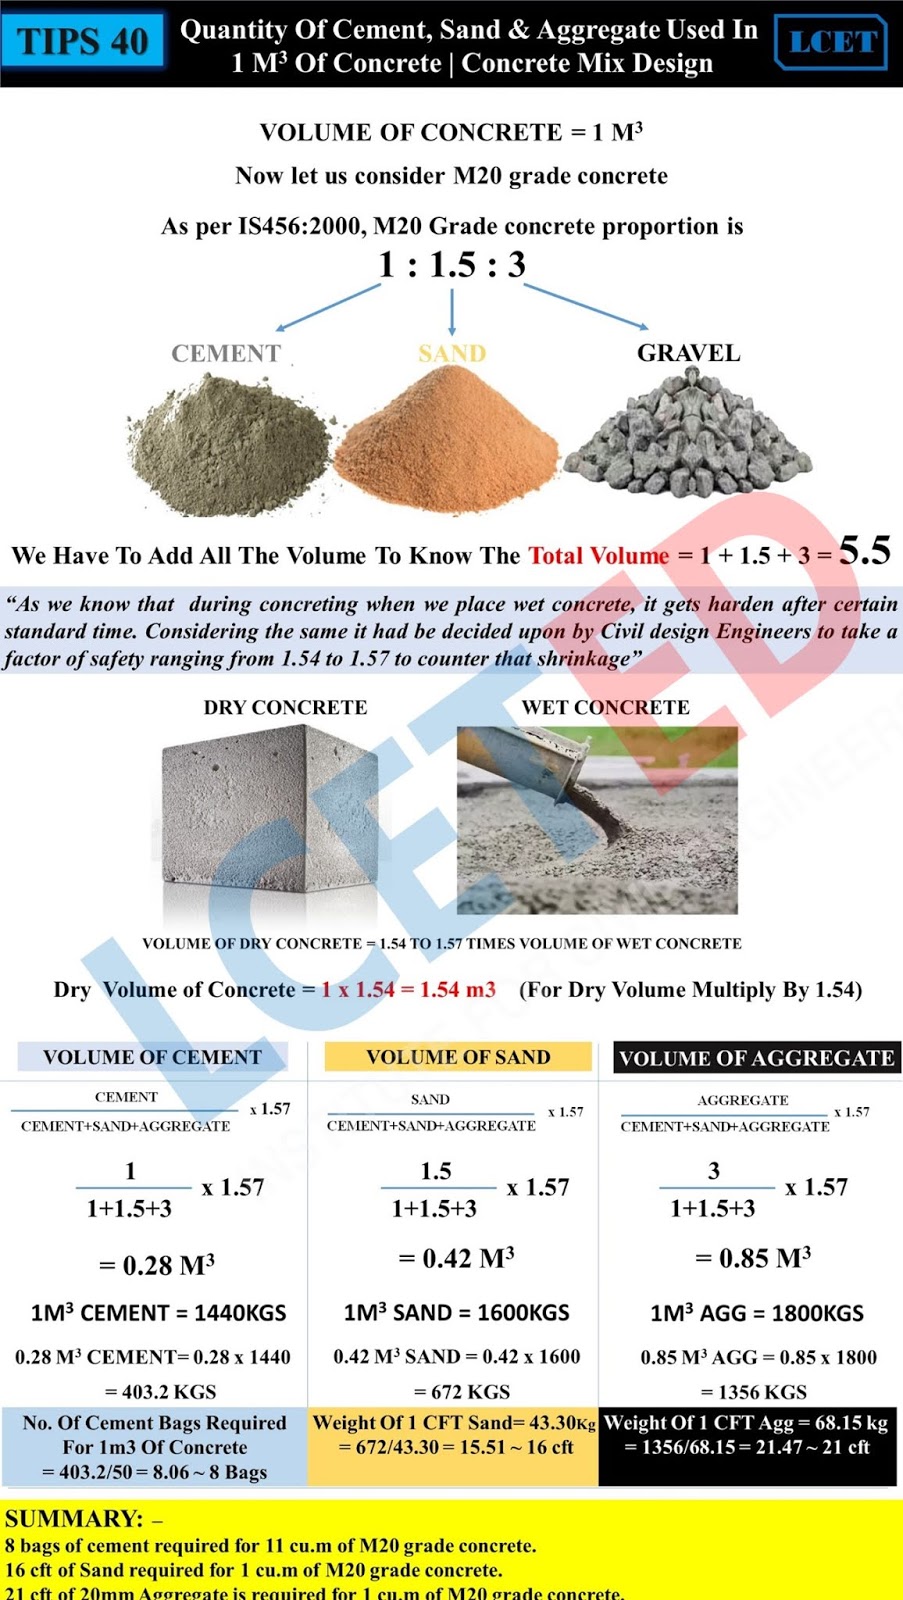 HOW TO CALCULATE CEMENT, SAND AND COARSE AGGREGATE QUANTITY IN CONCRETE